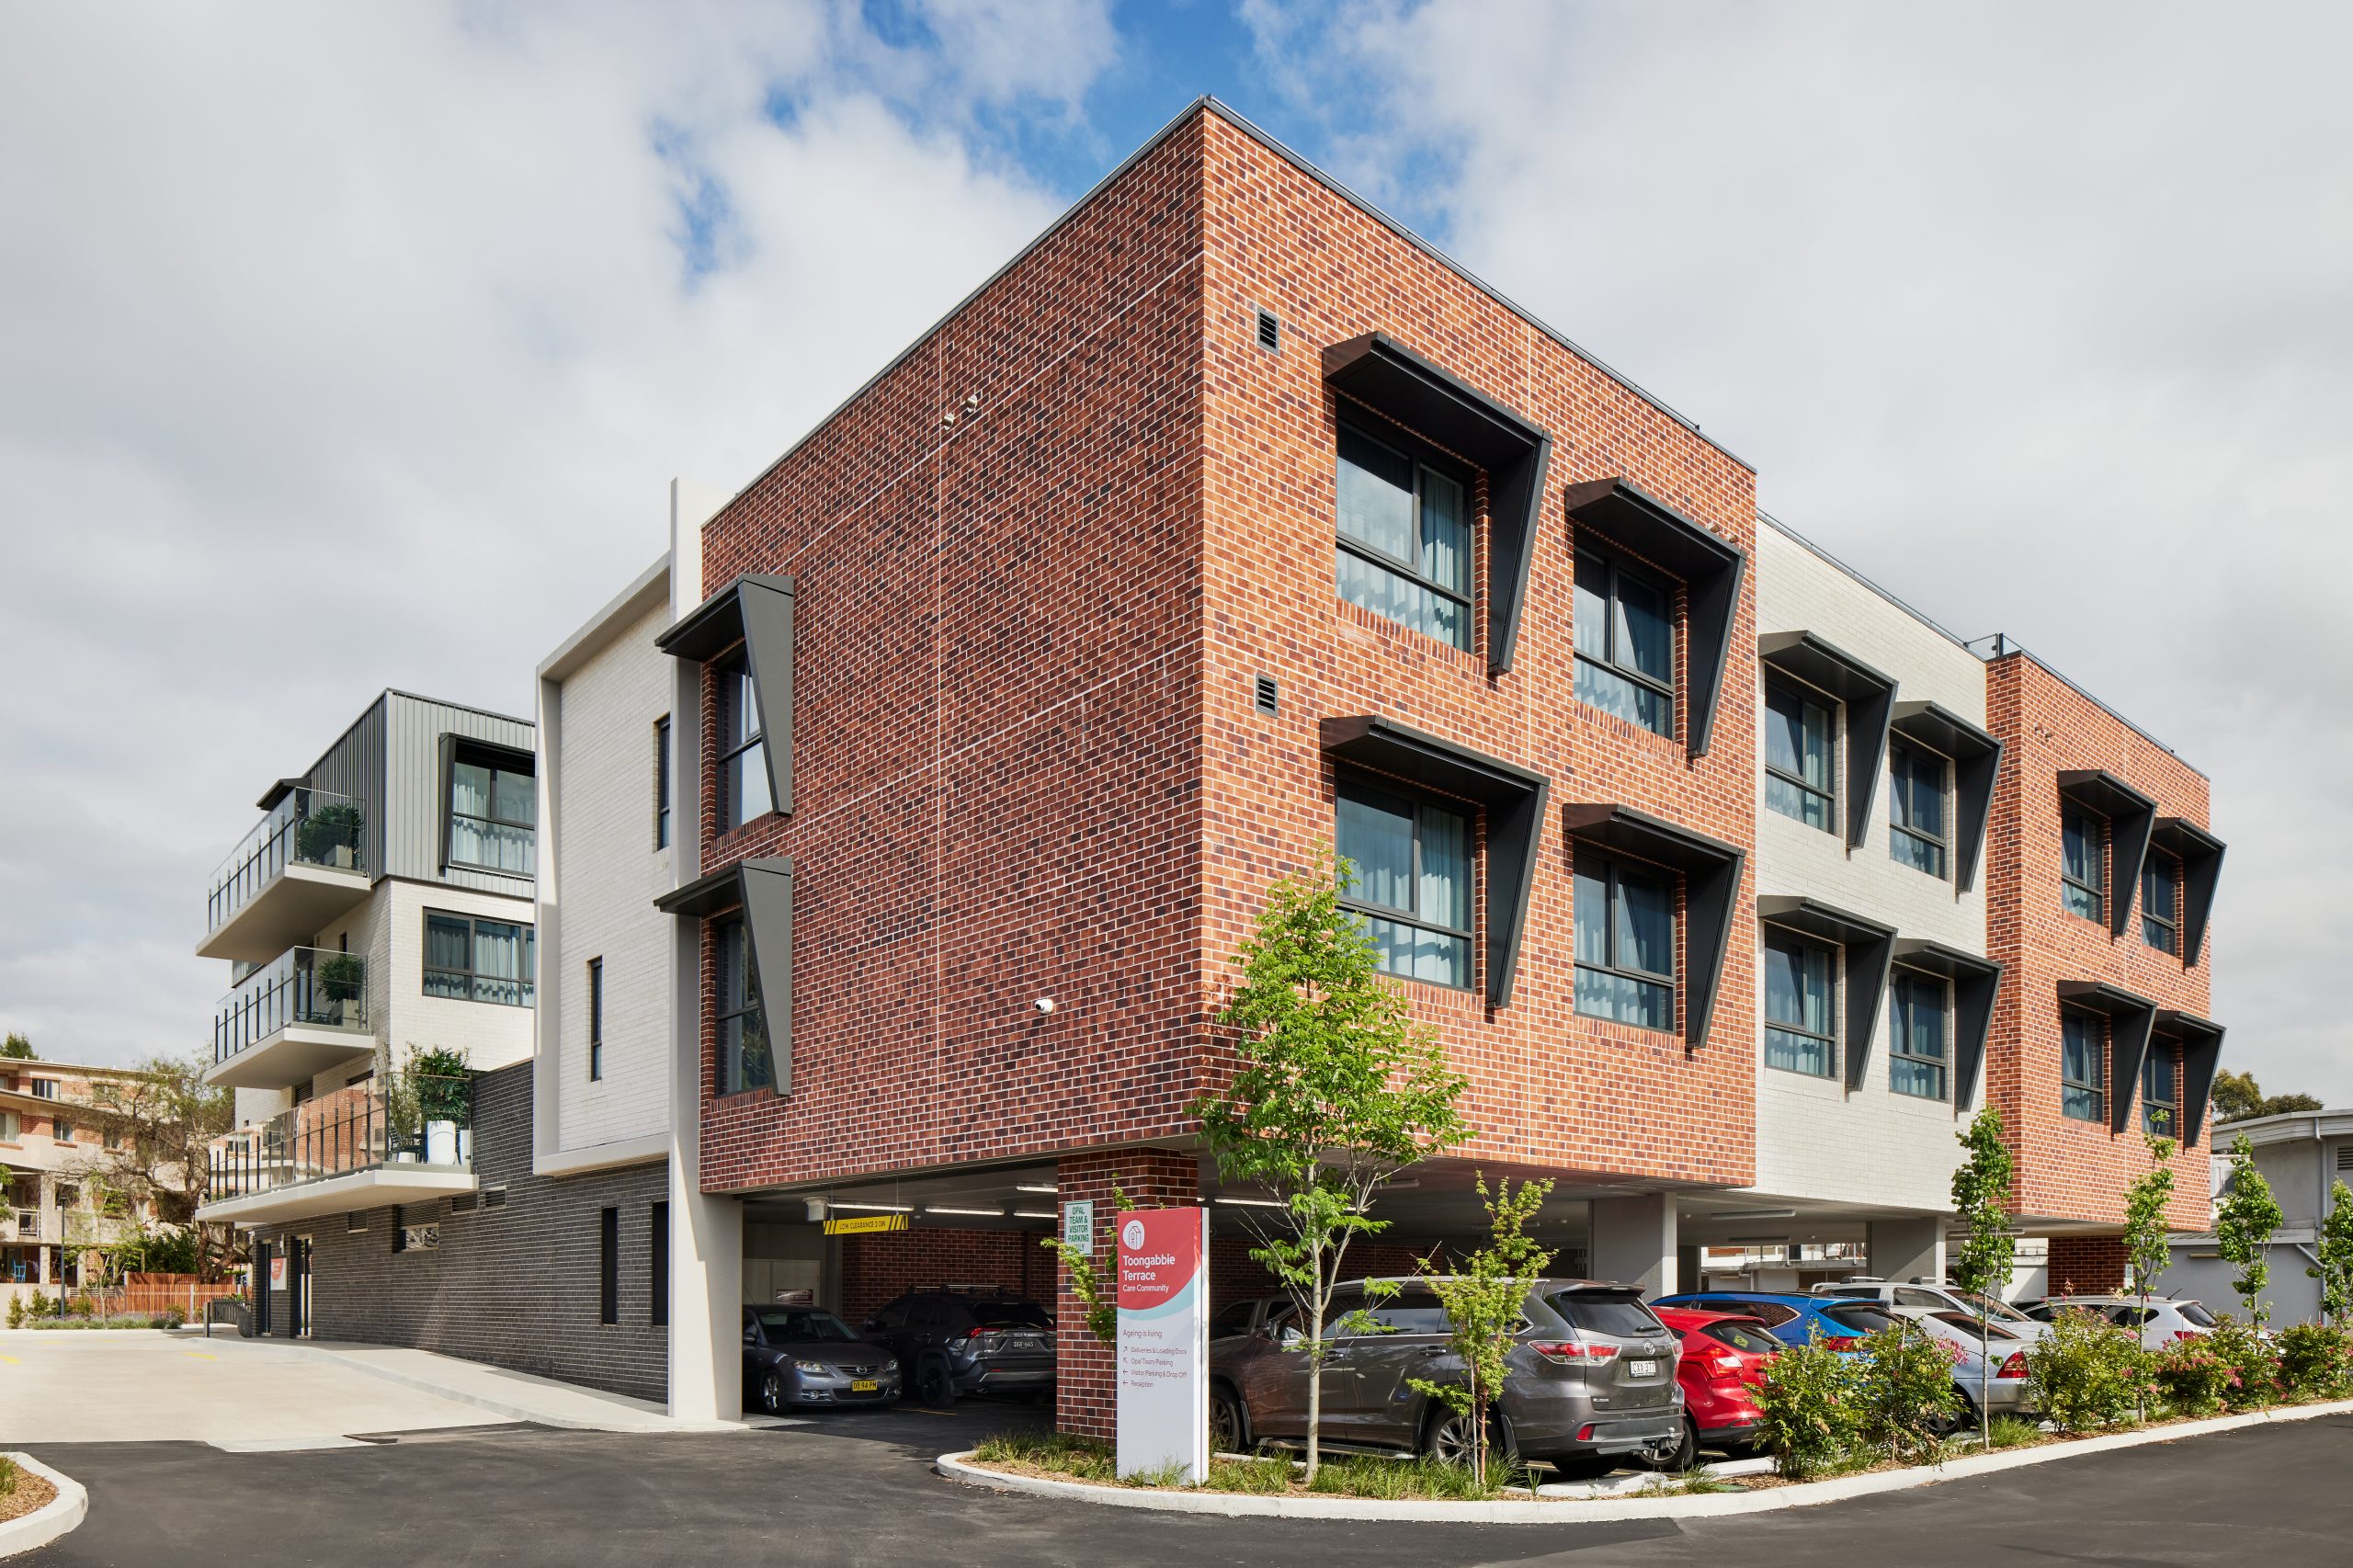 Winners of the Master Builders Association of NSW, Excellence in Construction awards for Toongabbie Terrace.